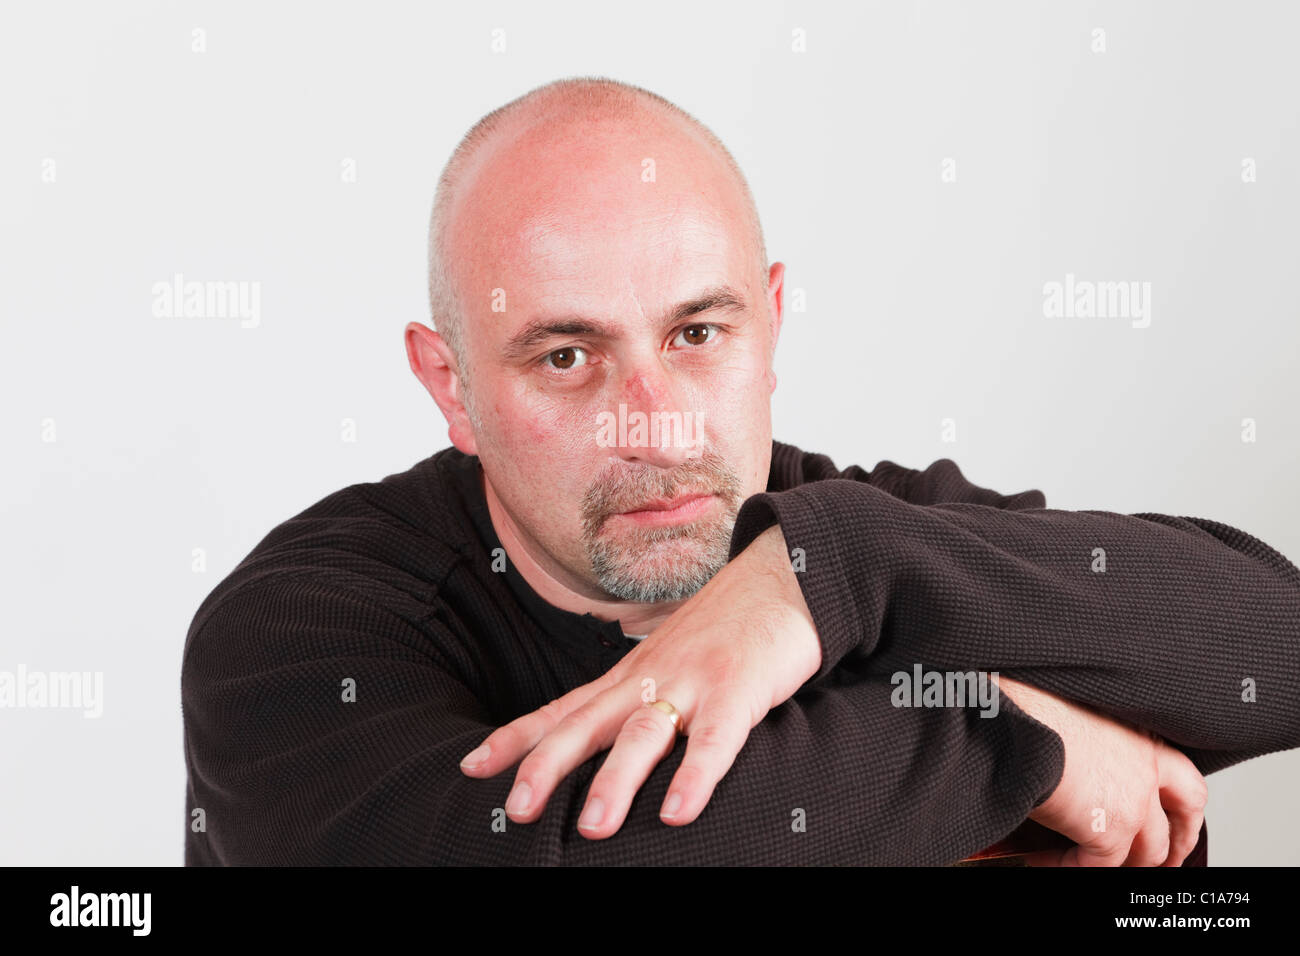 UK, Britain. Bald headed mature man with arms folded and a bored facial expression Stock Photo